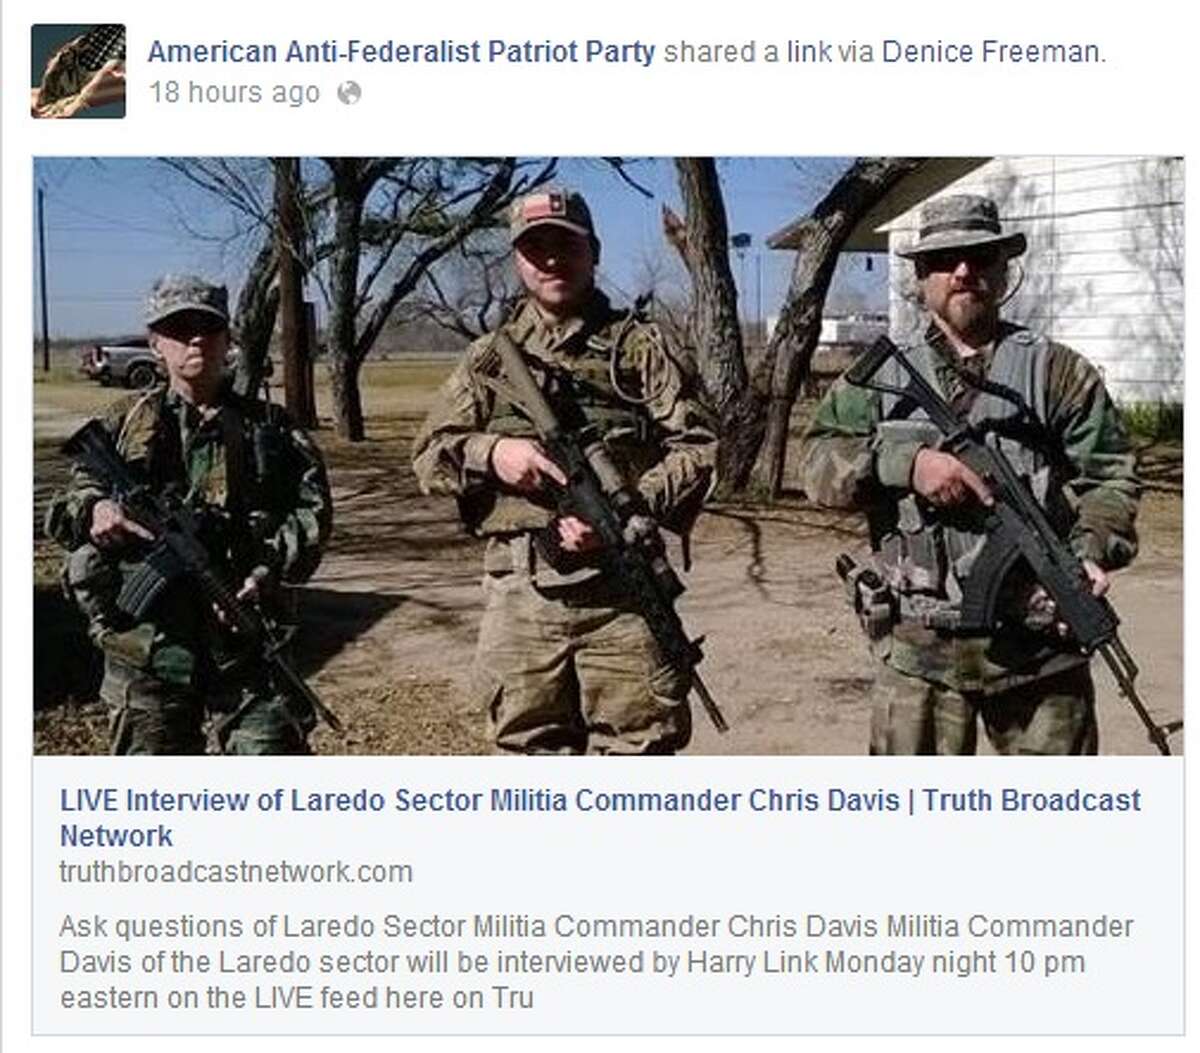 Facebook groups share the "Operation Secure Our Border" call to action.